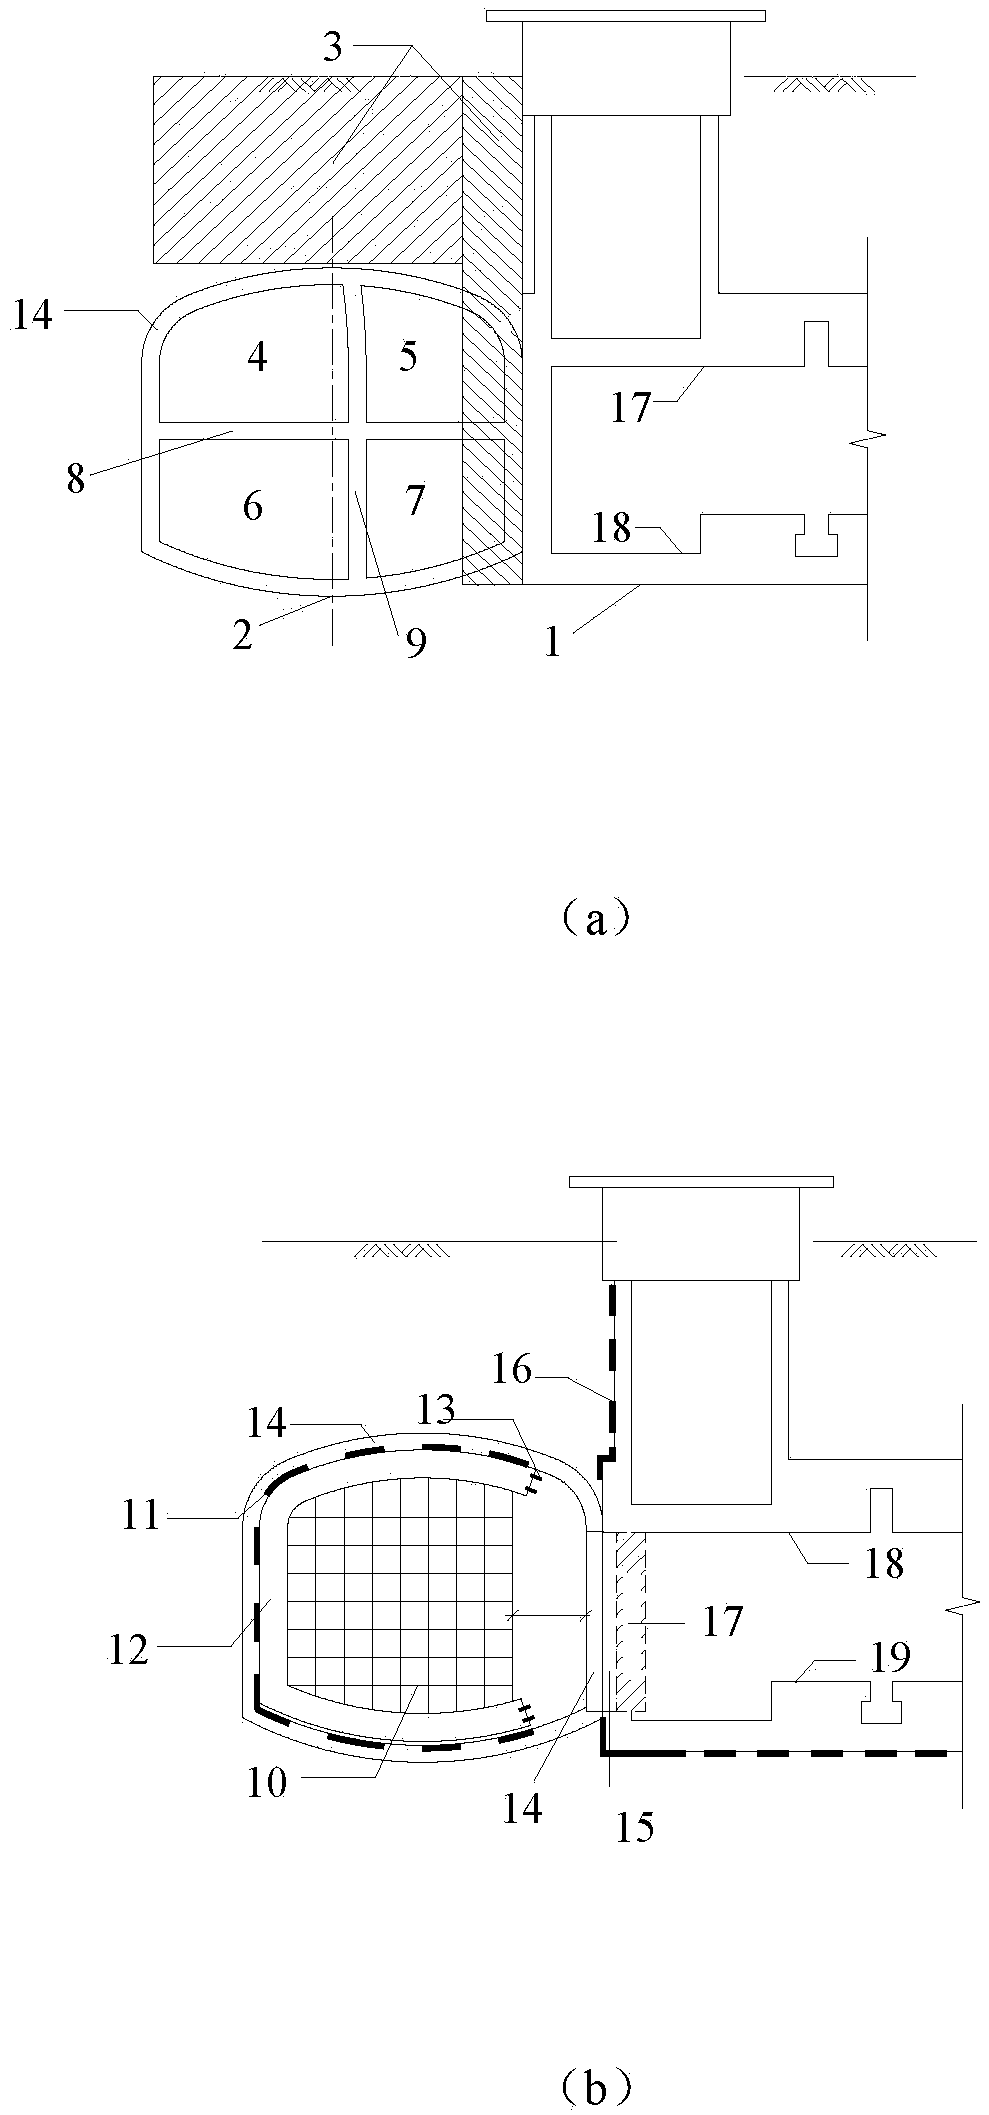 Communication and connection construction method of newly-added underground excavation channel and existing station hall layer